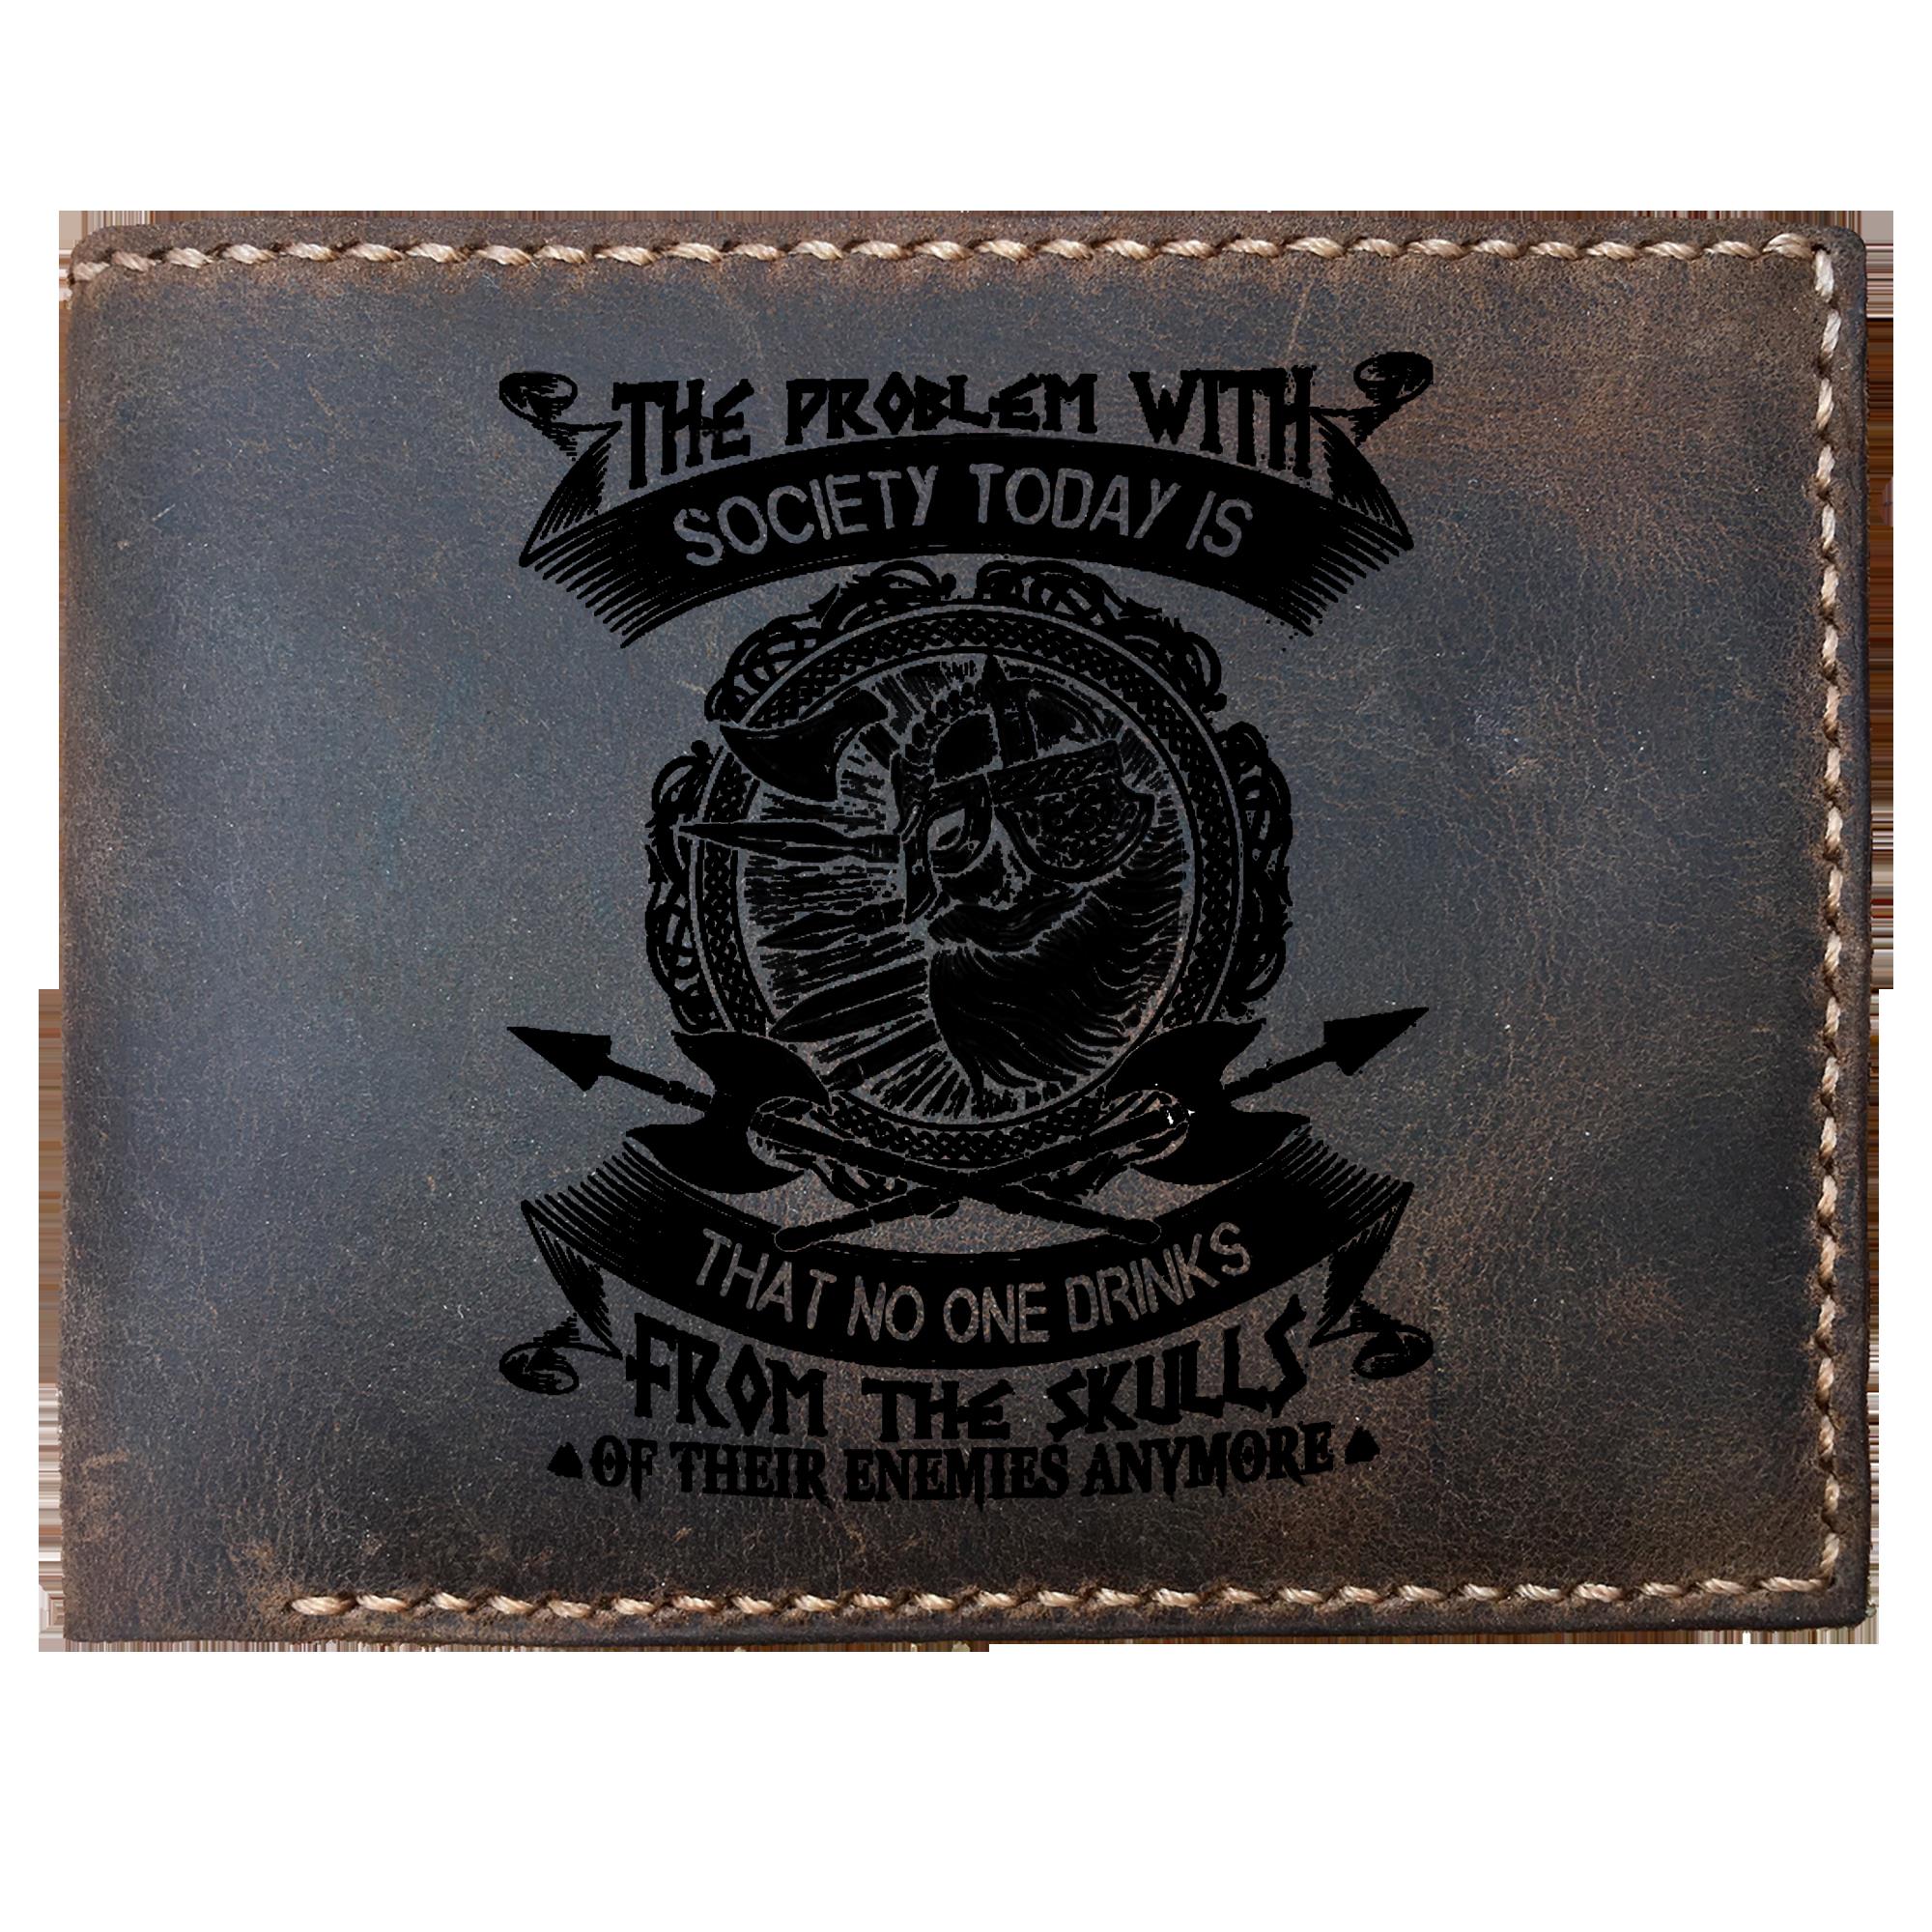 Skitongifts Funny Custom Laser Engraved Bifold Leather Wallet, The Problem With Society Today Is That No One Drinks From The Skills Of Their